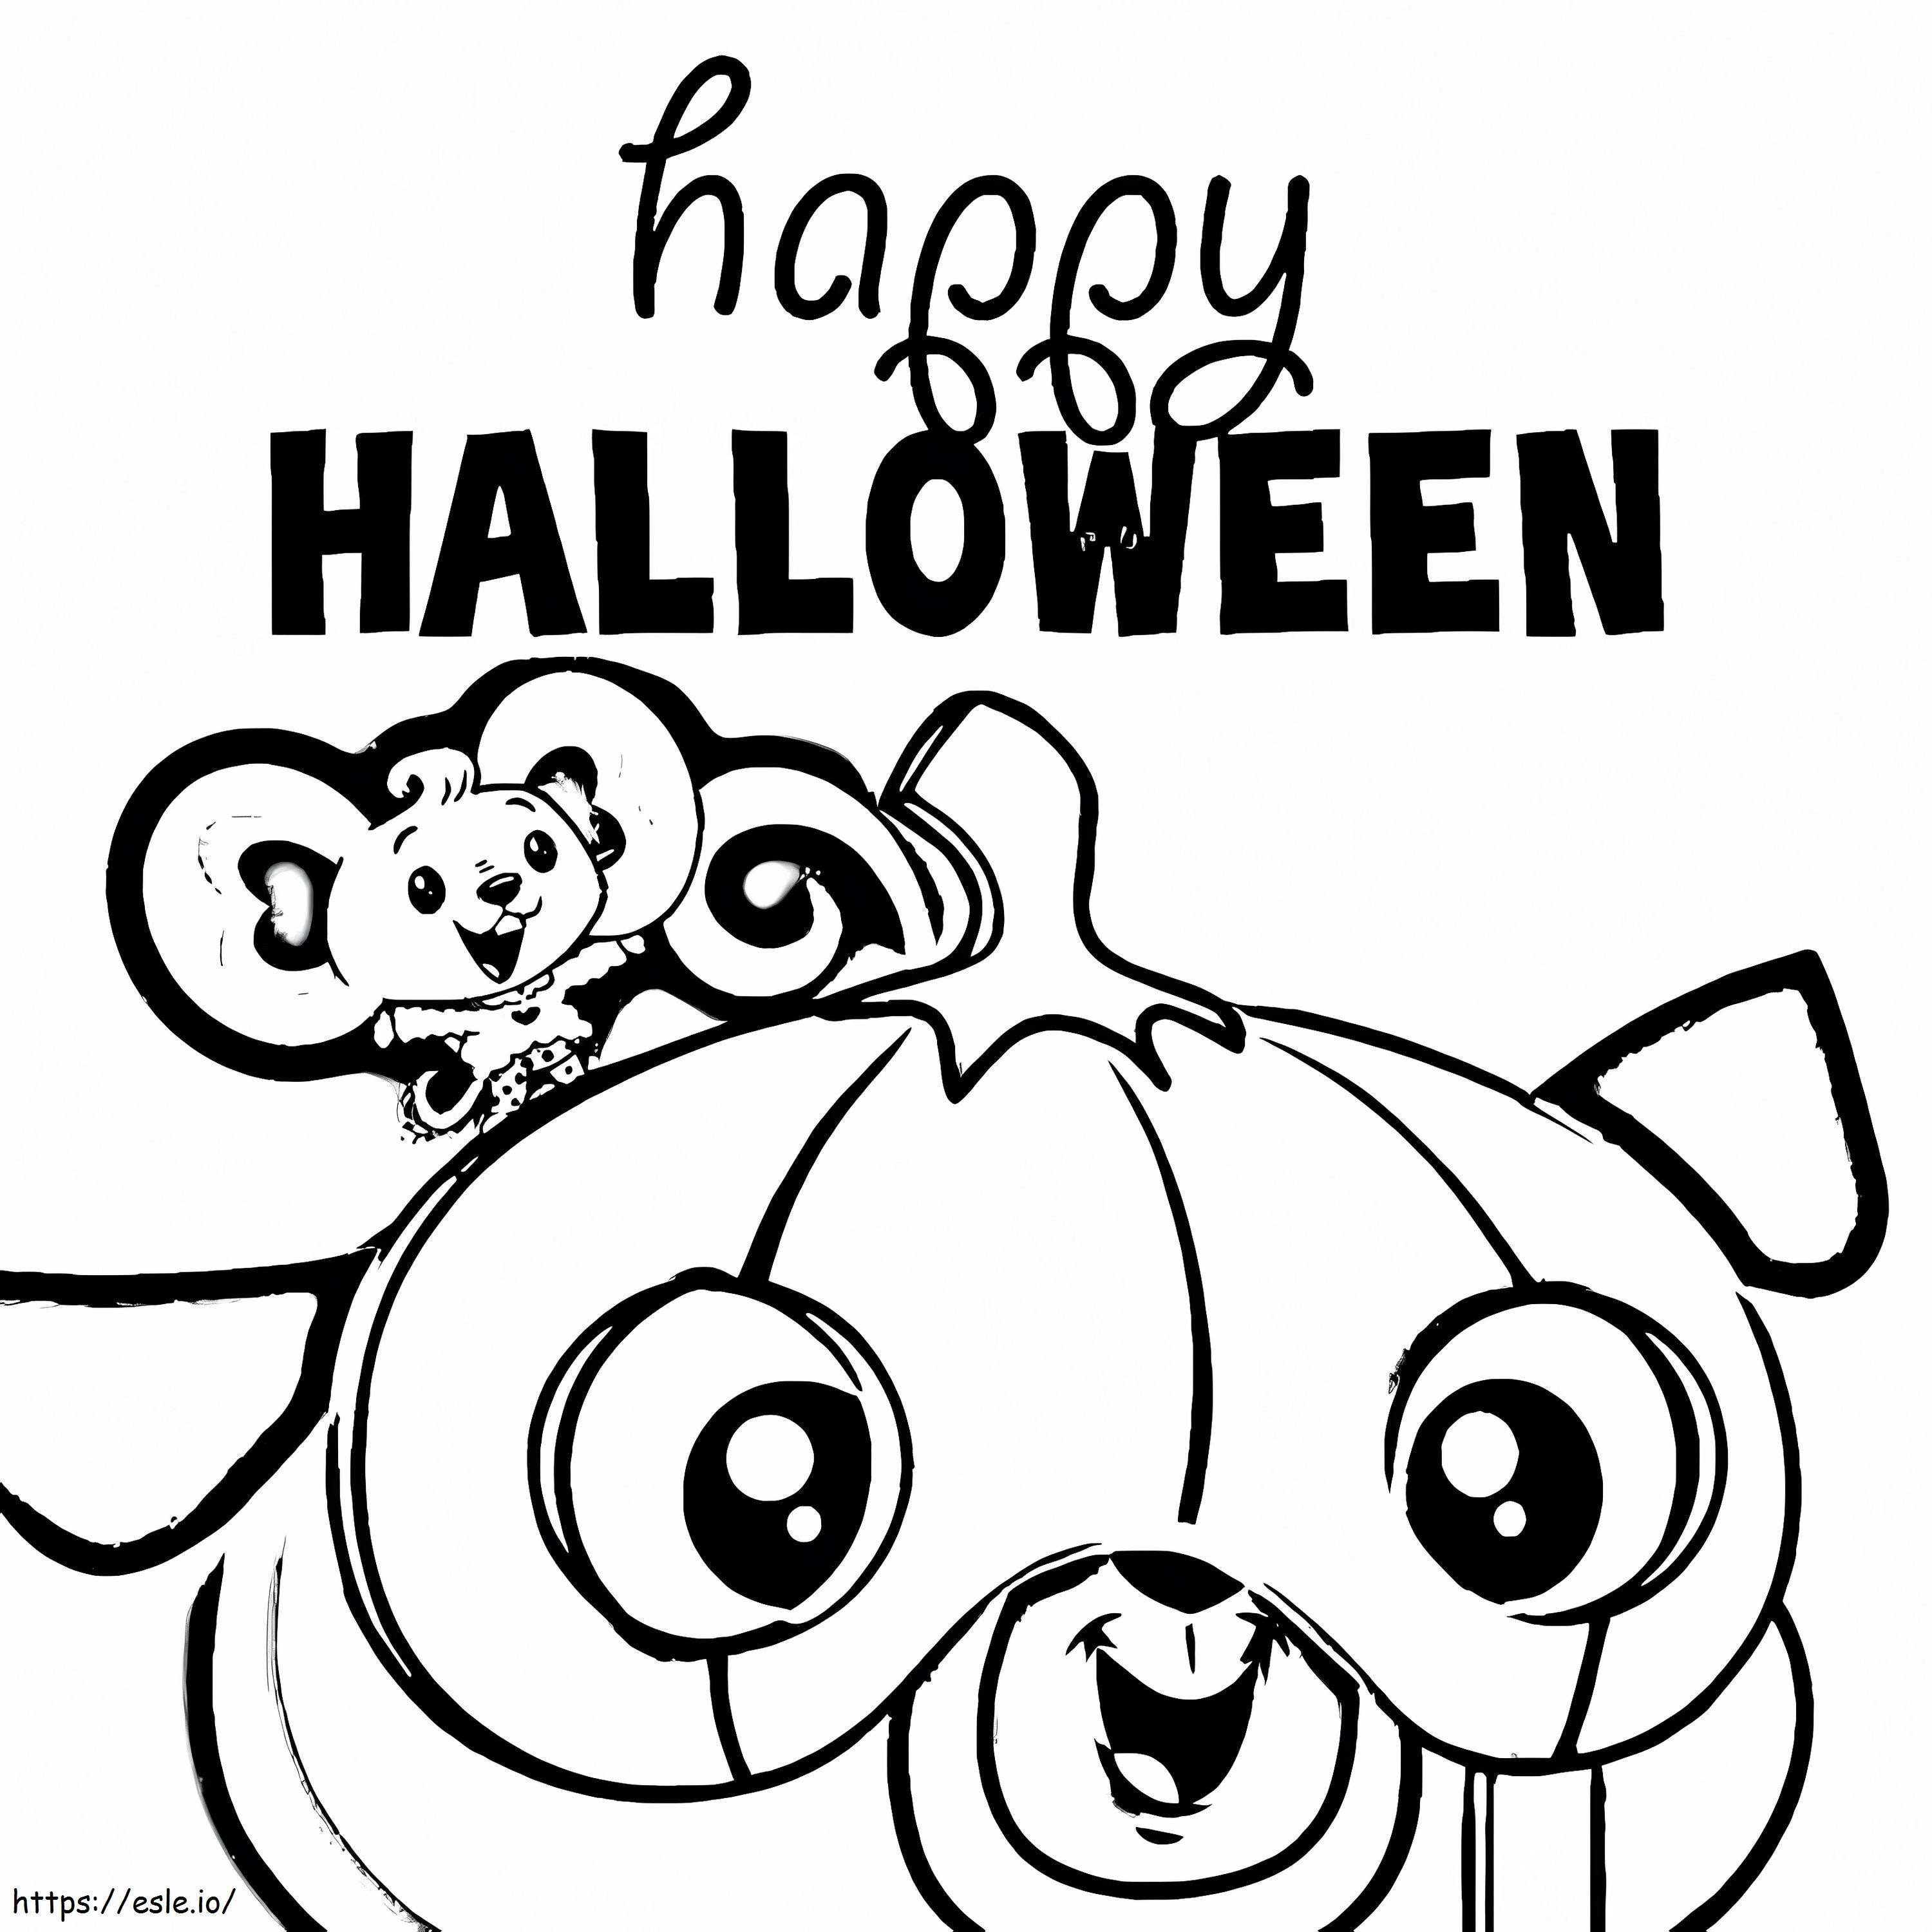 Halloween Chip And Potato coloring page